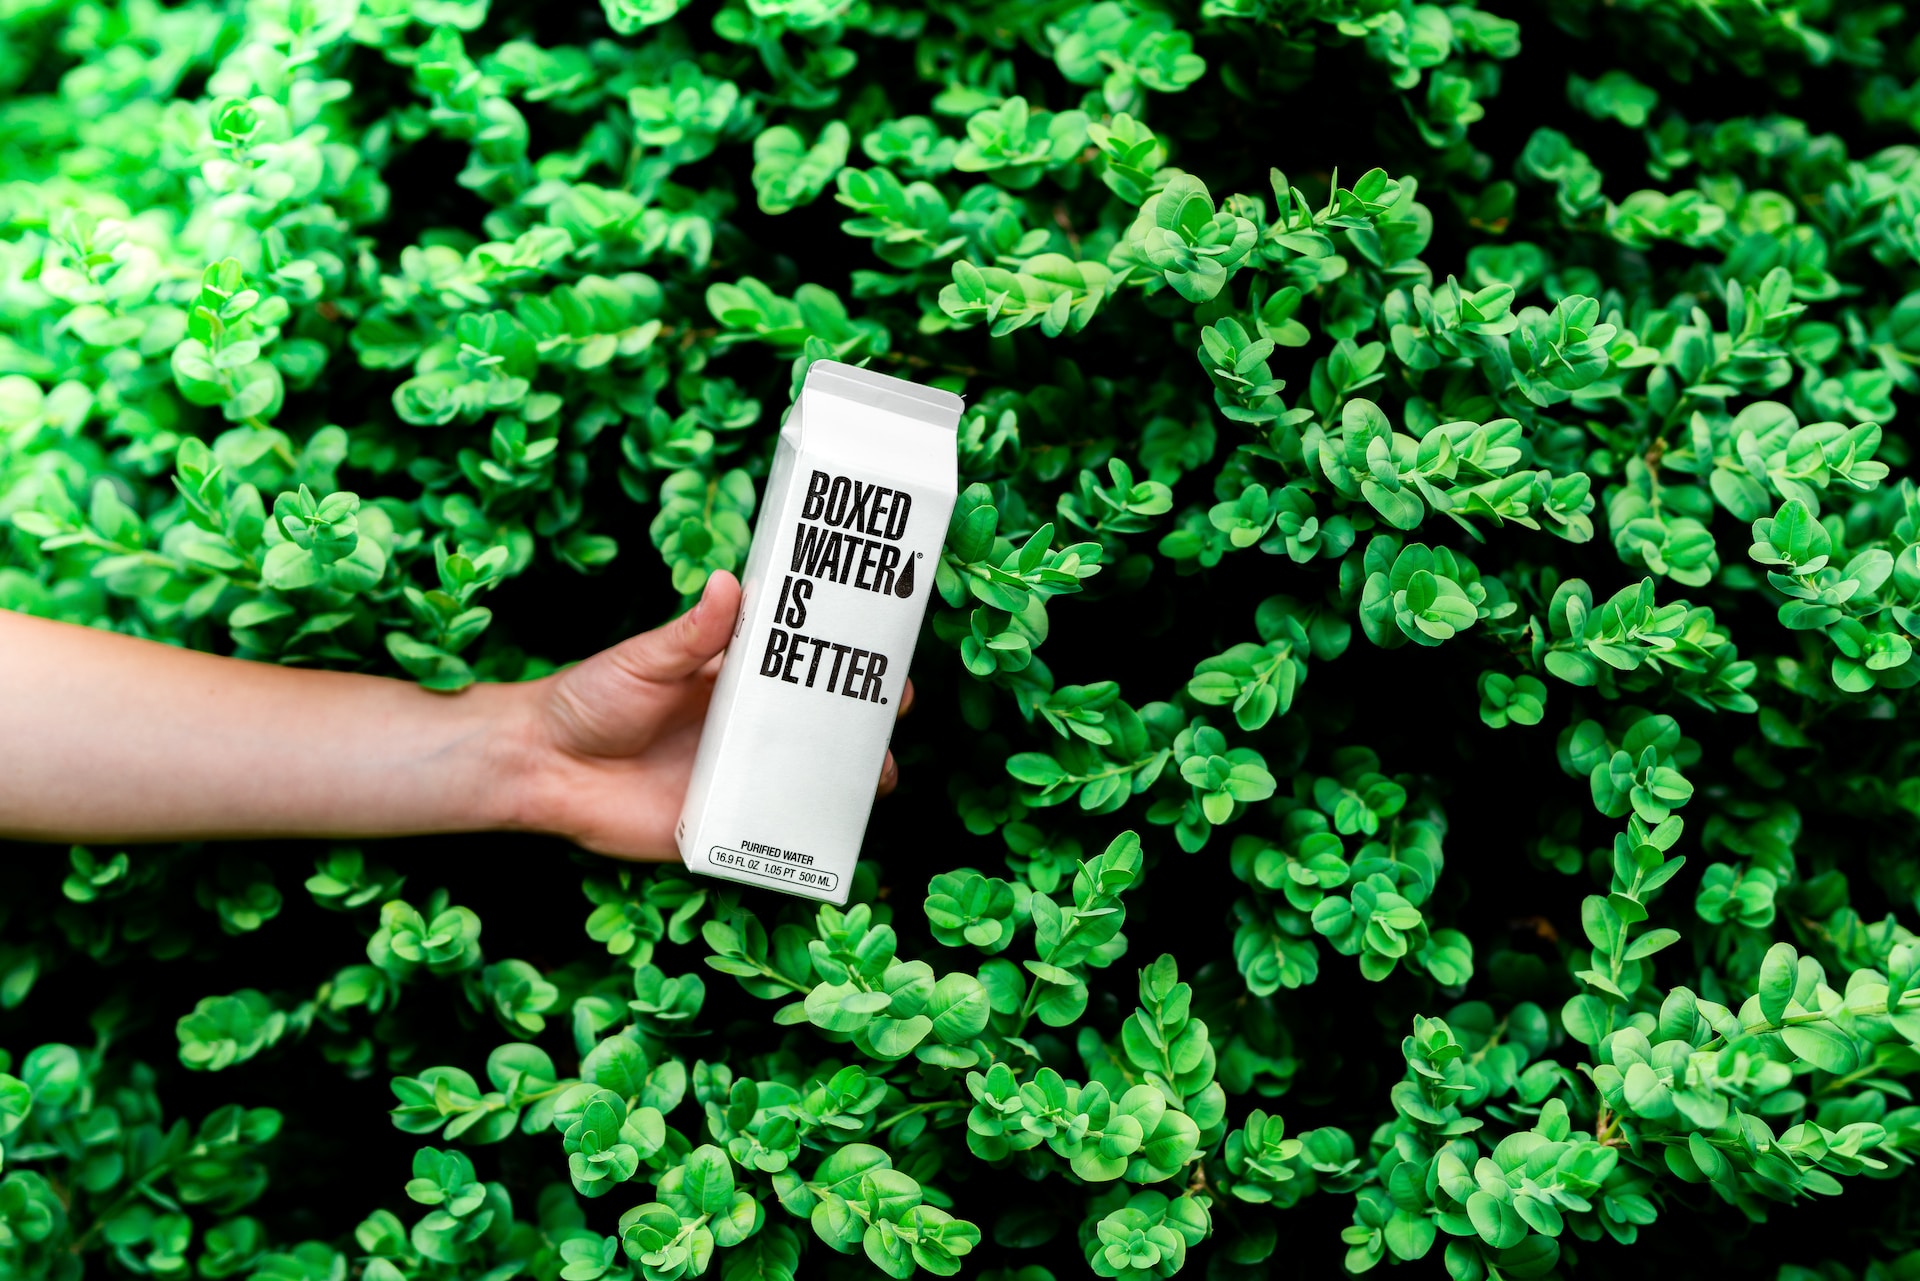 A disembodied hand holding boxed water.